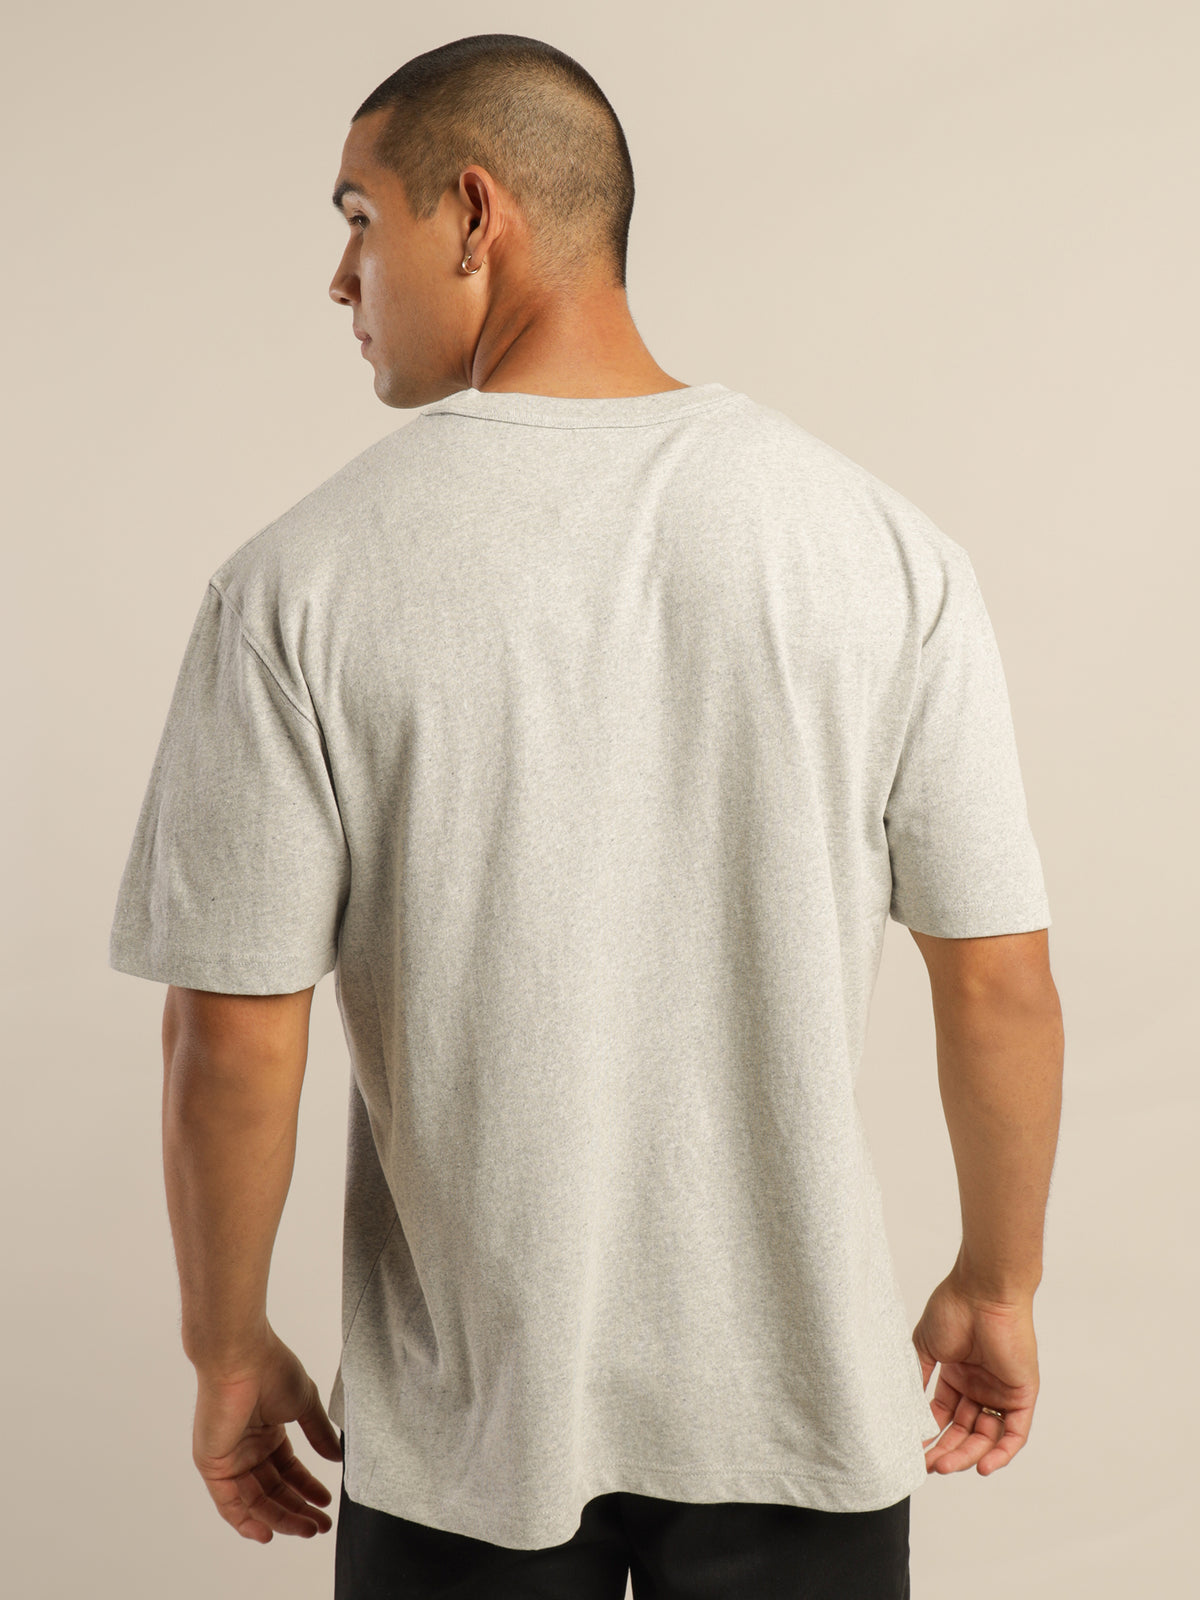 Re:Bound Archive T-Shirt in Grey